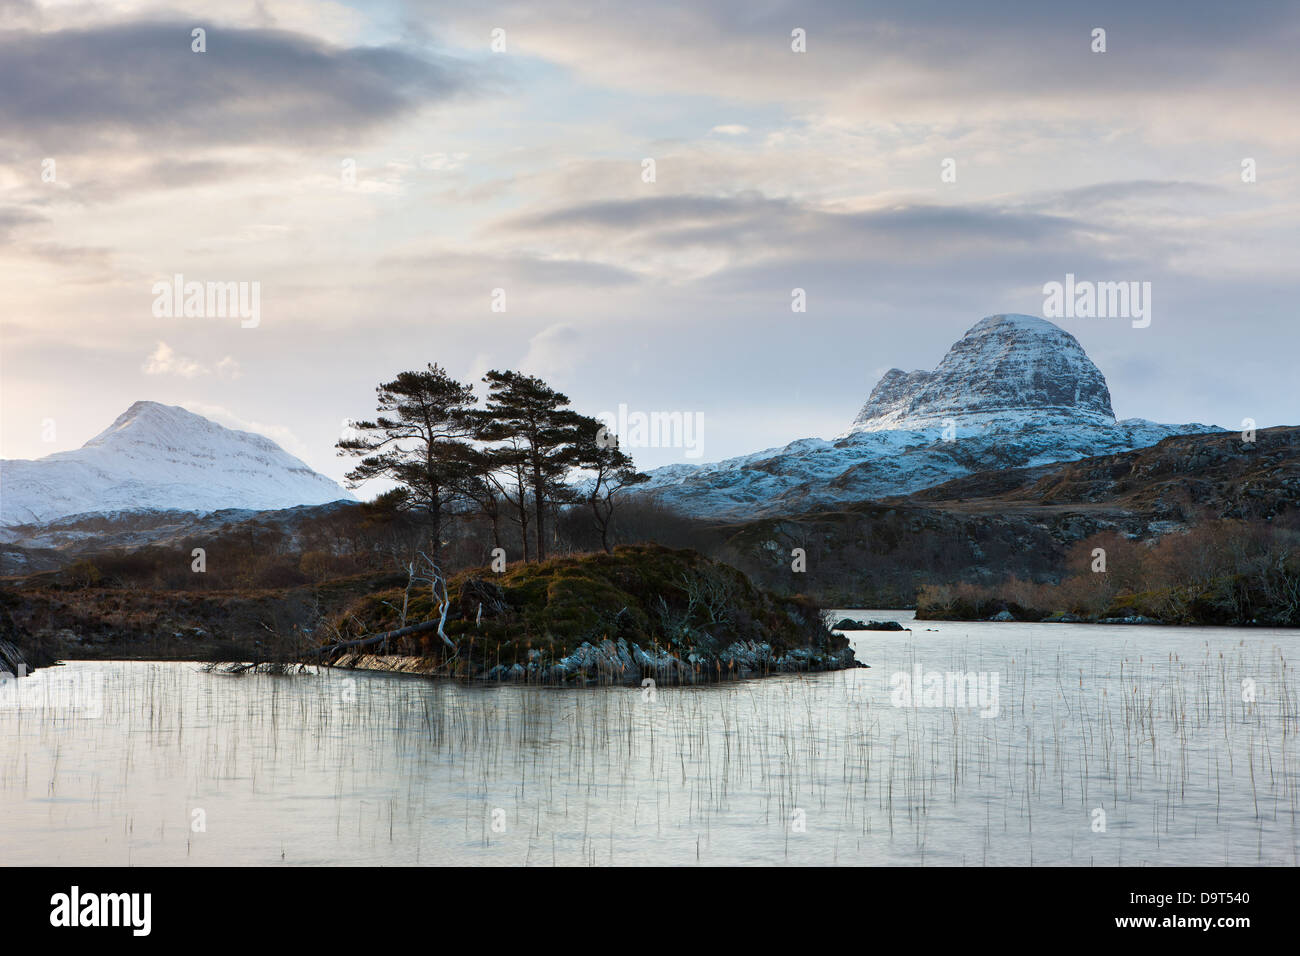 Loch Druim Suardalain with Mts Canisp & Suilven dusted in snow, Sutherland, Scotland, UK Stock Photo